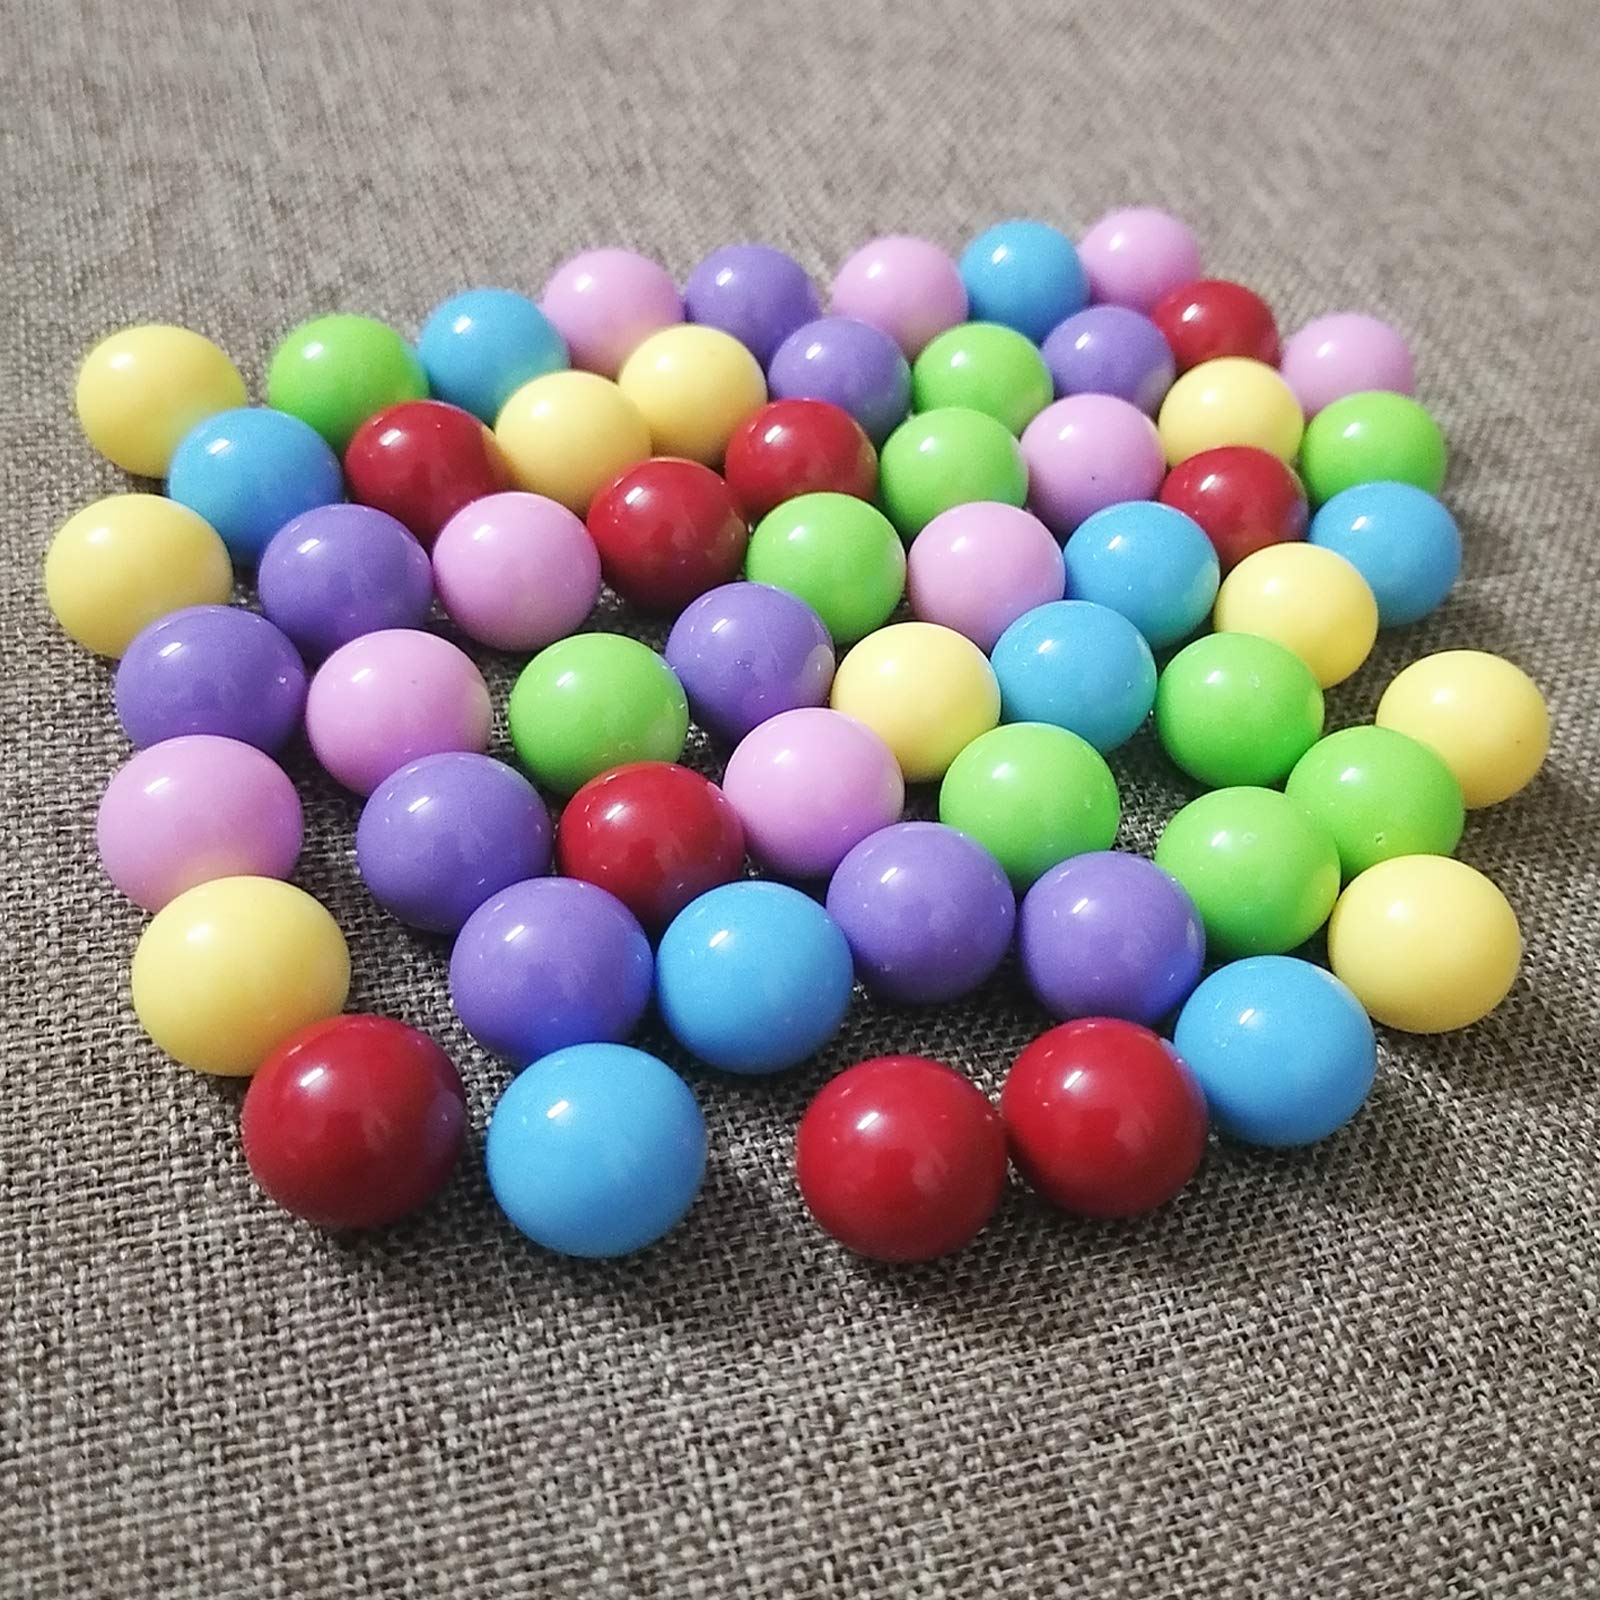 Hotusi 60 Pcs Chinese Checkers Marbles Balls in 6 Colors,14mm Game Replacement Marbles Balls for Marble Run, Marbles Game